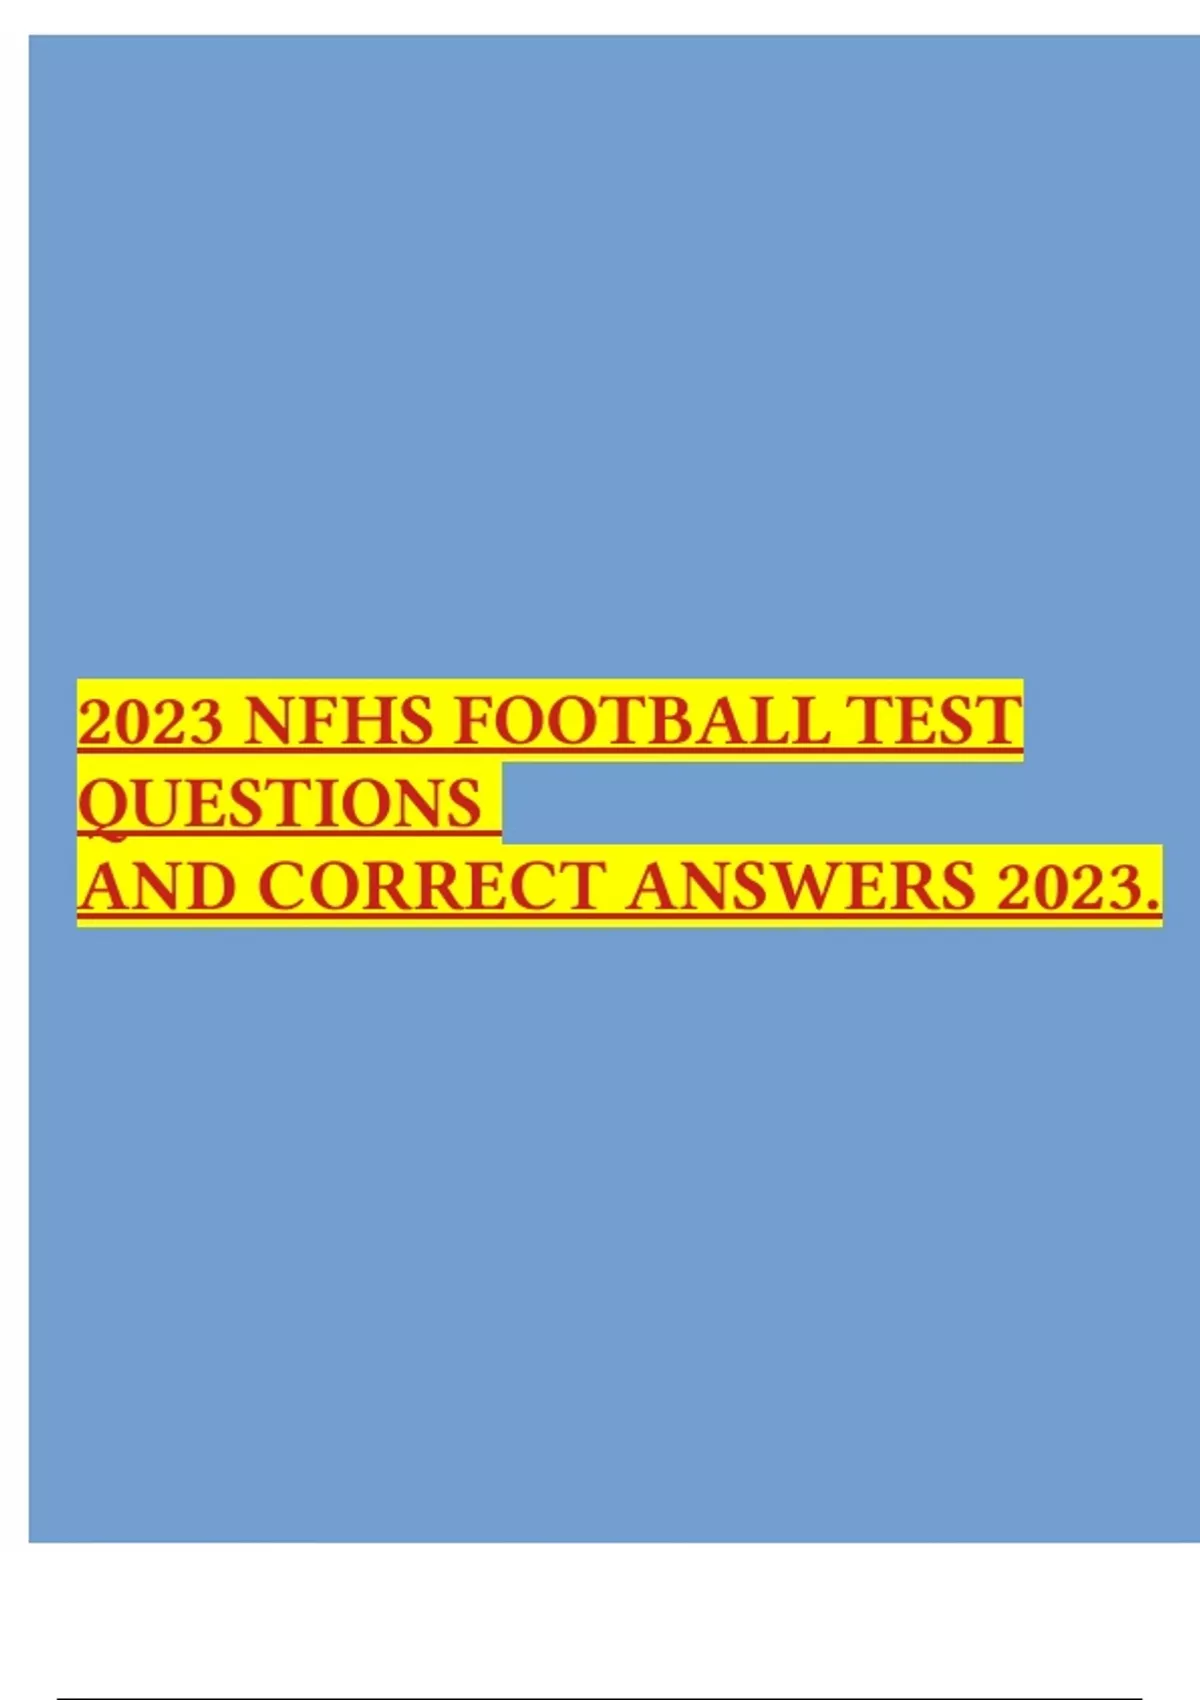 2023 NFHS FOOTBALL TEST QUESTIONS AND CORRECT ANSWERS 2023 NFHS